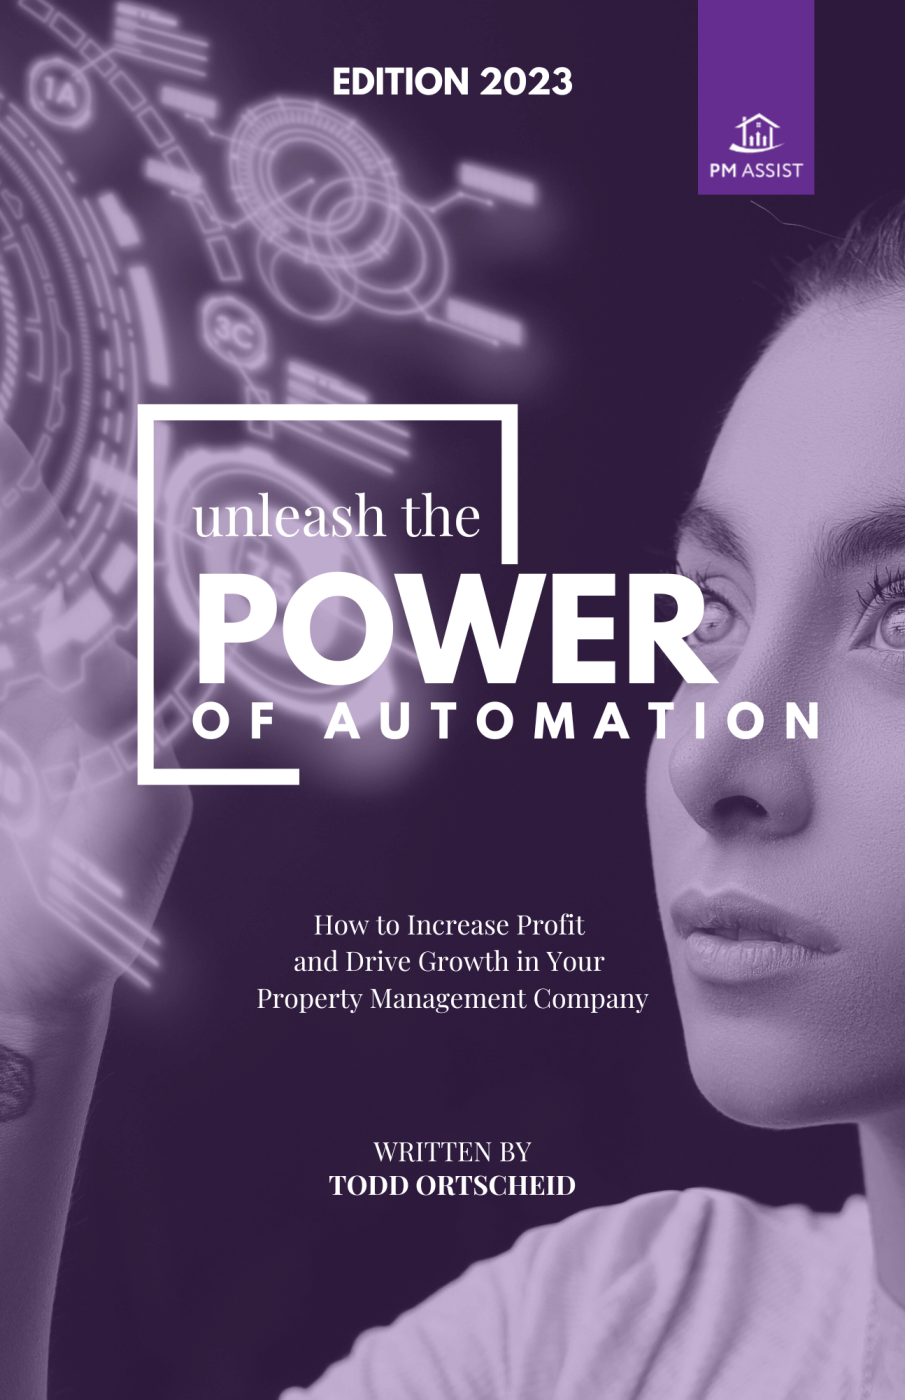 Unleash the Power of Automation: How to Increase Profit and Drive Growth in Your Property Management Company